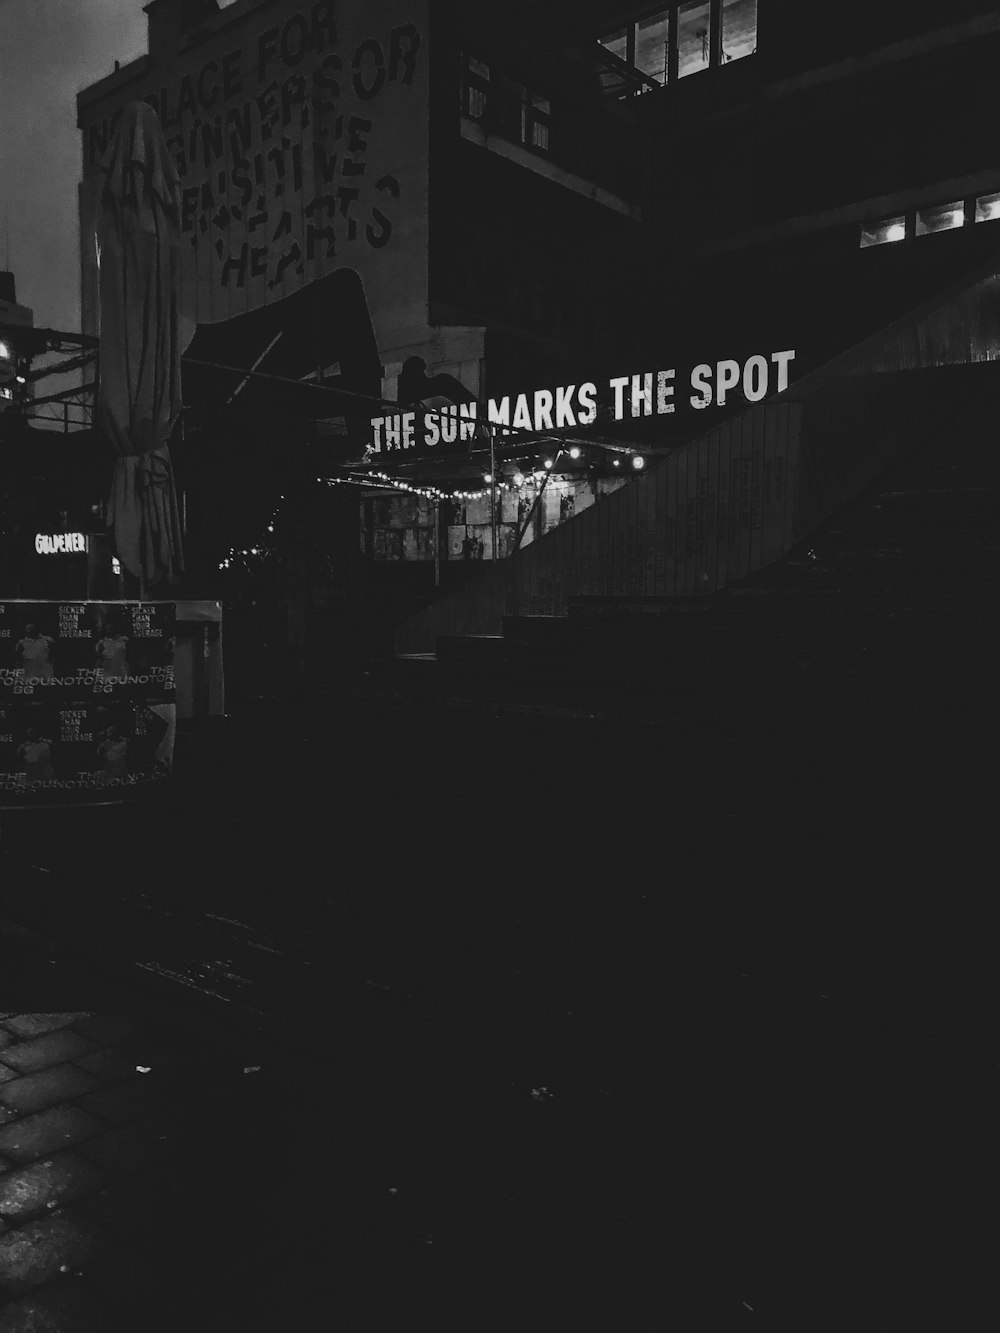 grayscale photography of the sun marks the spot printed building